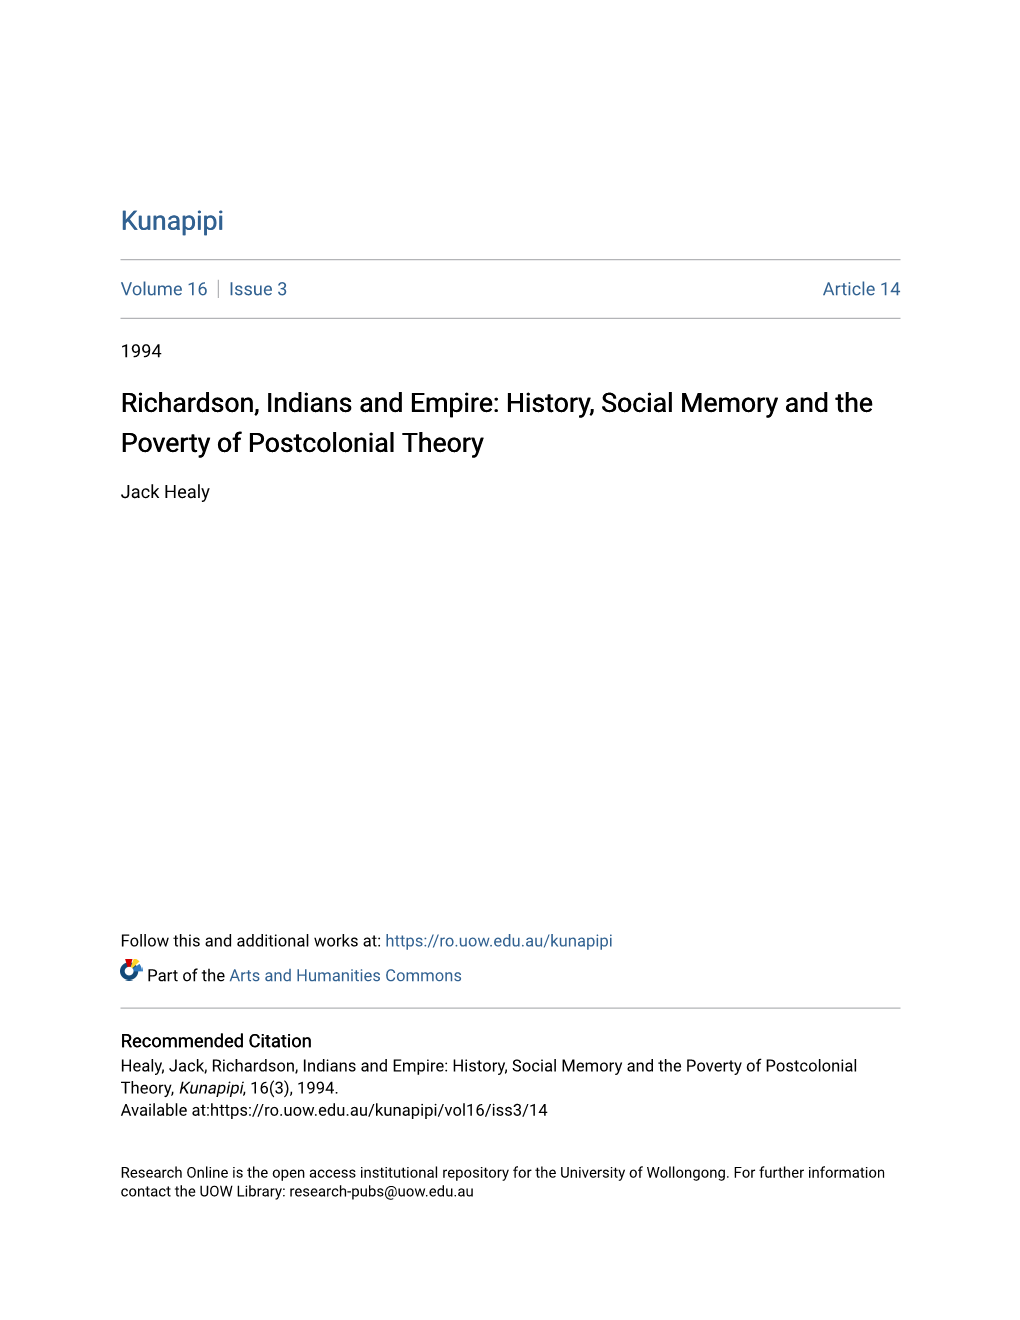 Richardson, Indians and Empire: History, Social Memory and the Poverty of Postcolonial Theory